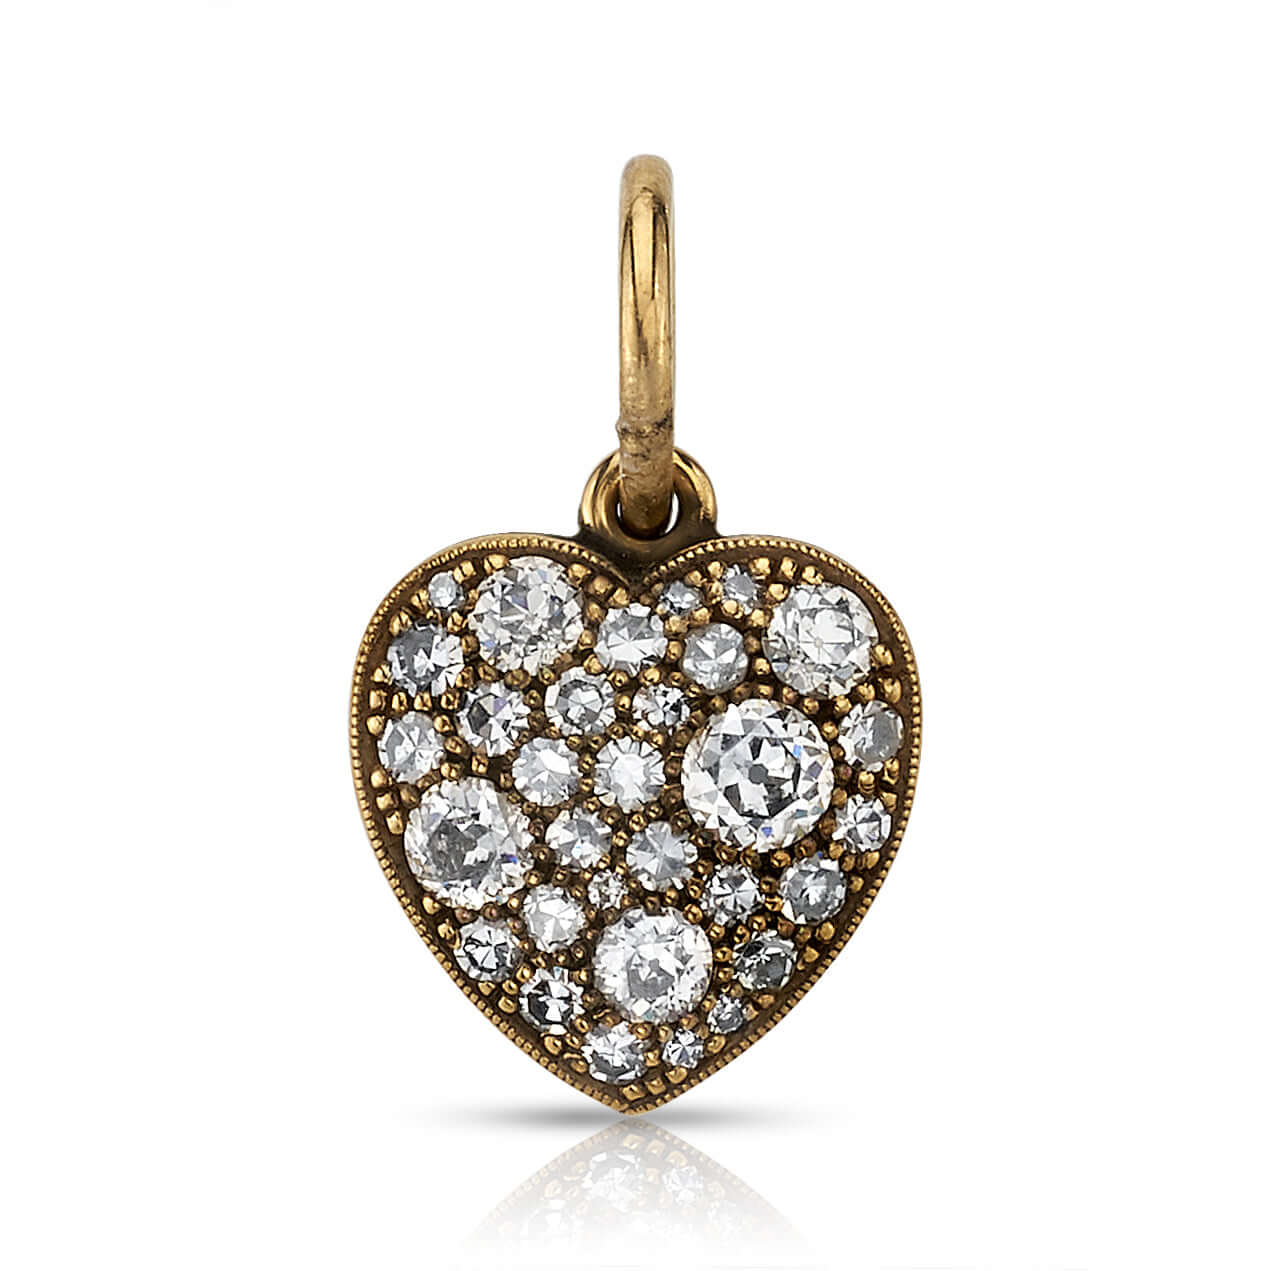 SINGLE STONE SMALL COBBLESTONE HEART PENDANT featuring Approximately 0.80ctw various old cut and round brilliant cut diamonds set in a handcrafted 18K yellow gold heart pendant. Prices vary according to diamond weight. Heart measures 12.5mm x 11.7mm. Pric